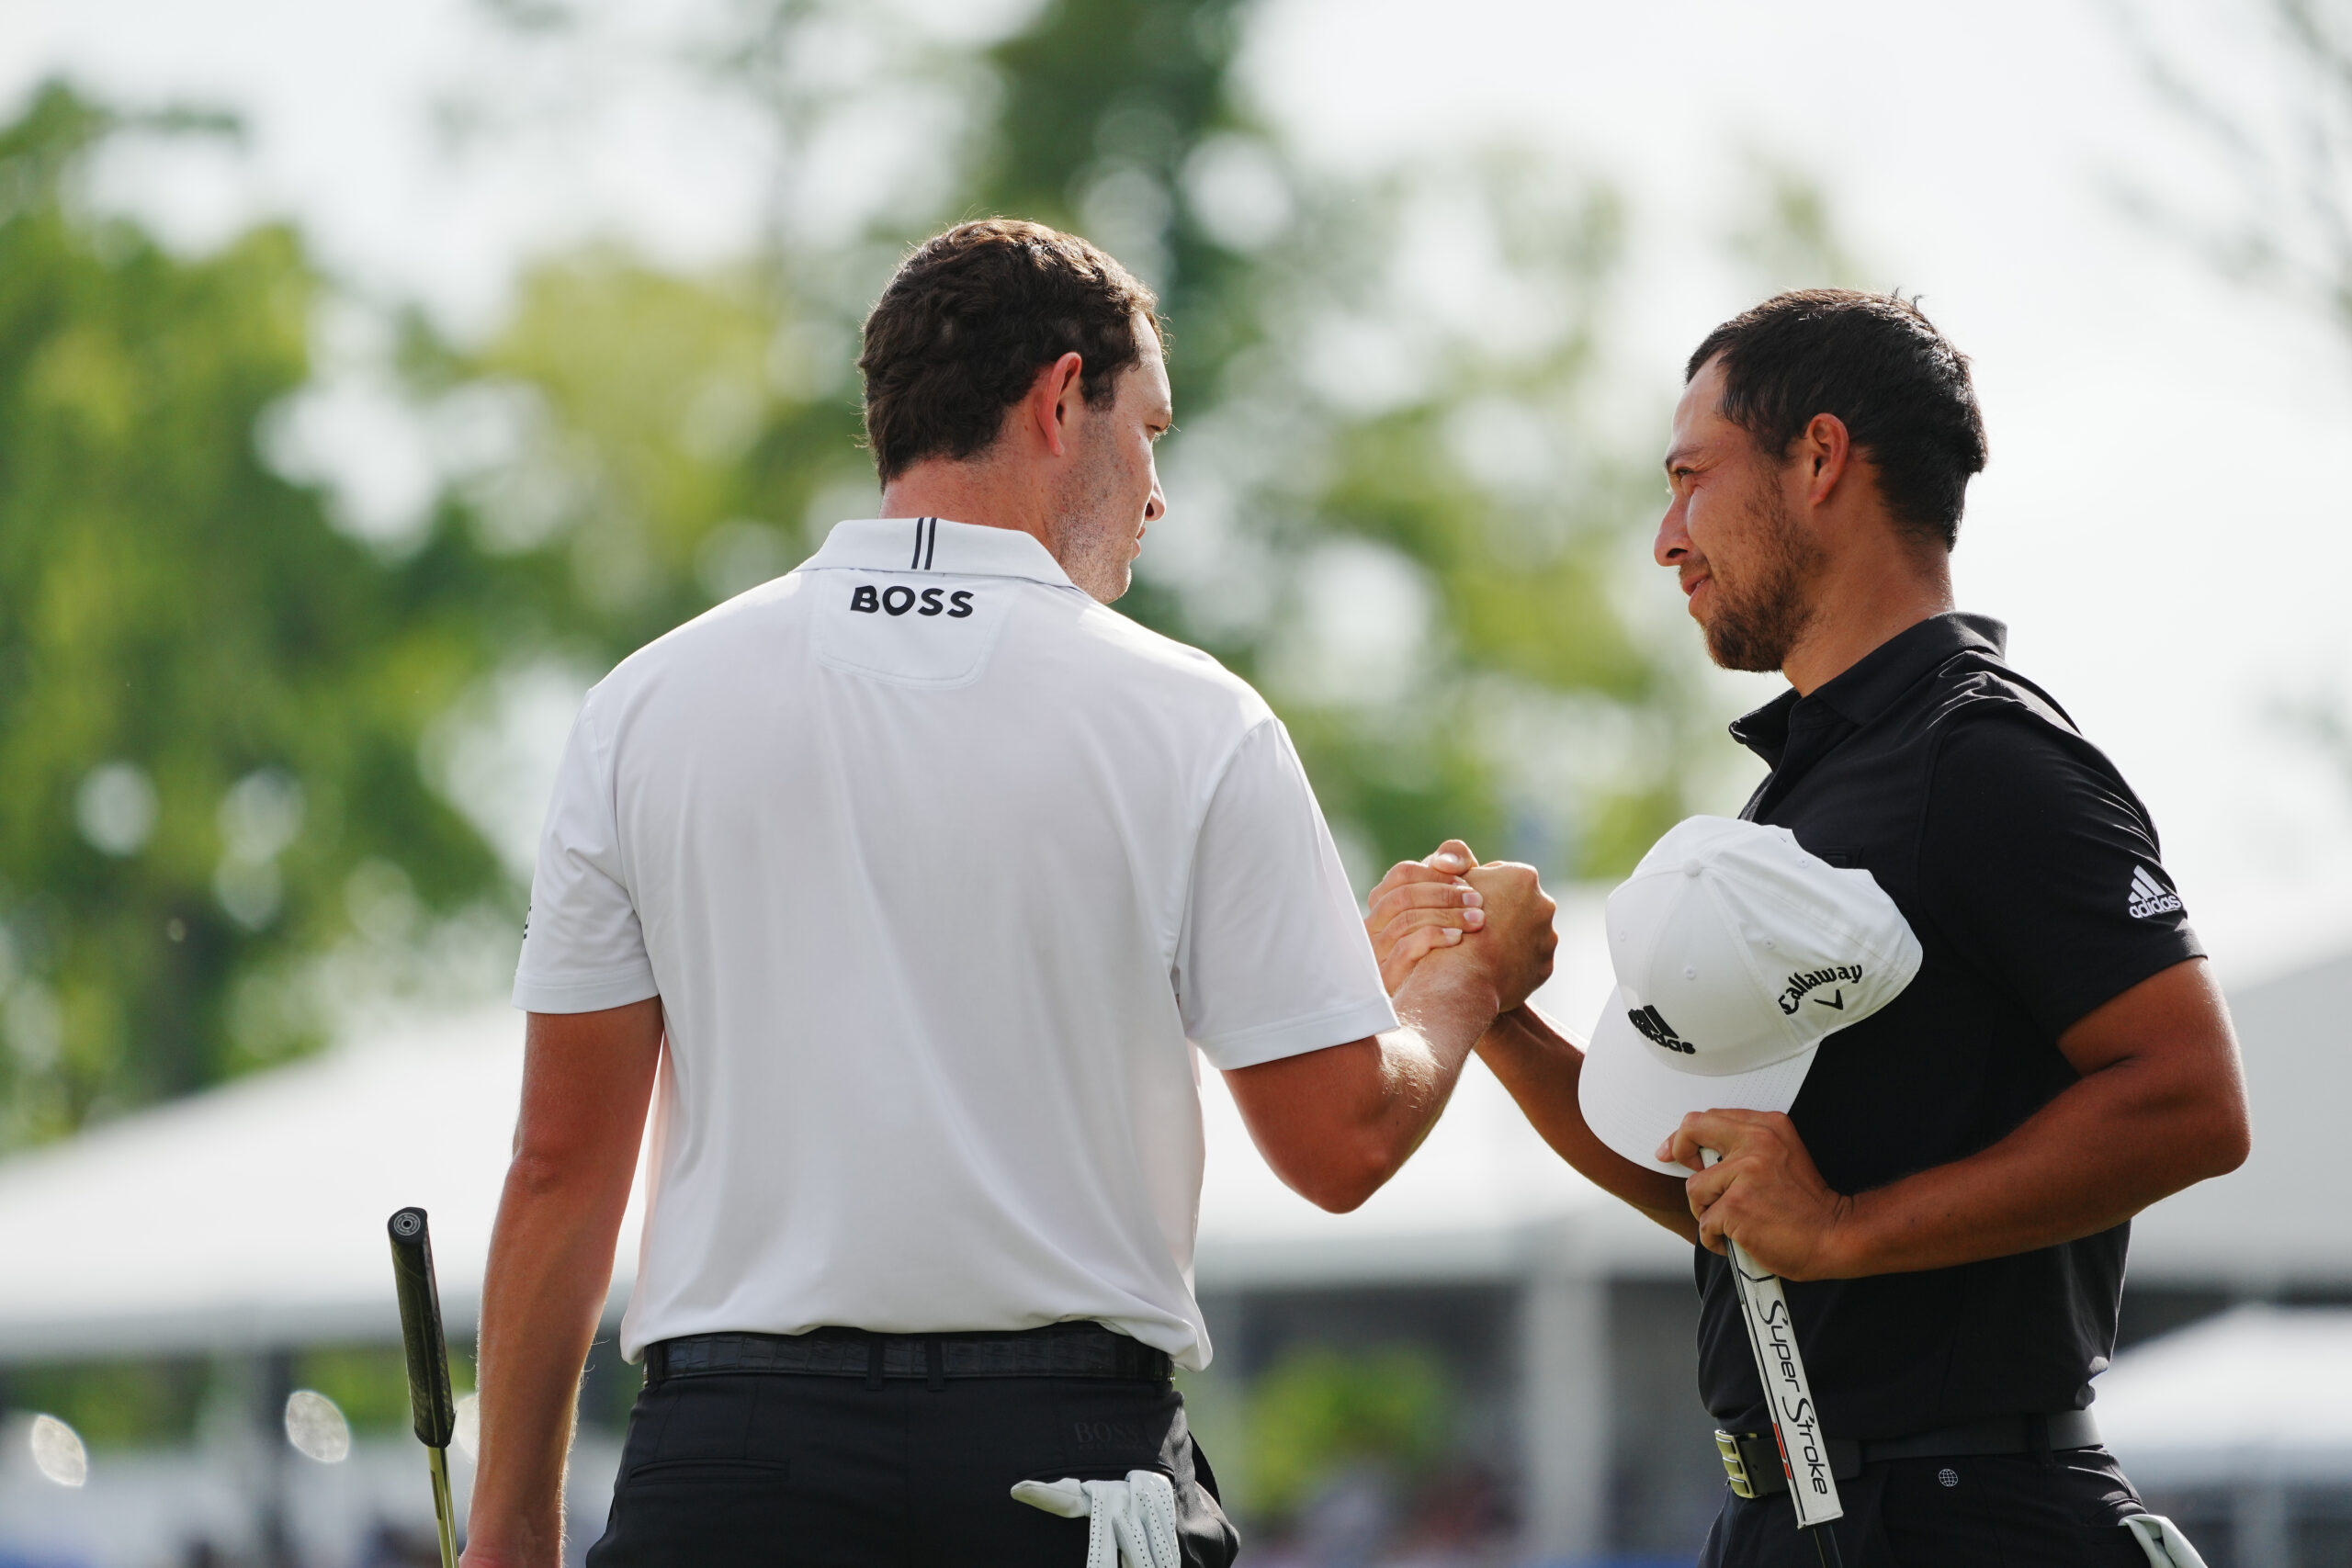 2023 Zurich Classic: Defending champs Patrick Cantlay and Xander Schauffele dish on friendship bracelets and talking trash